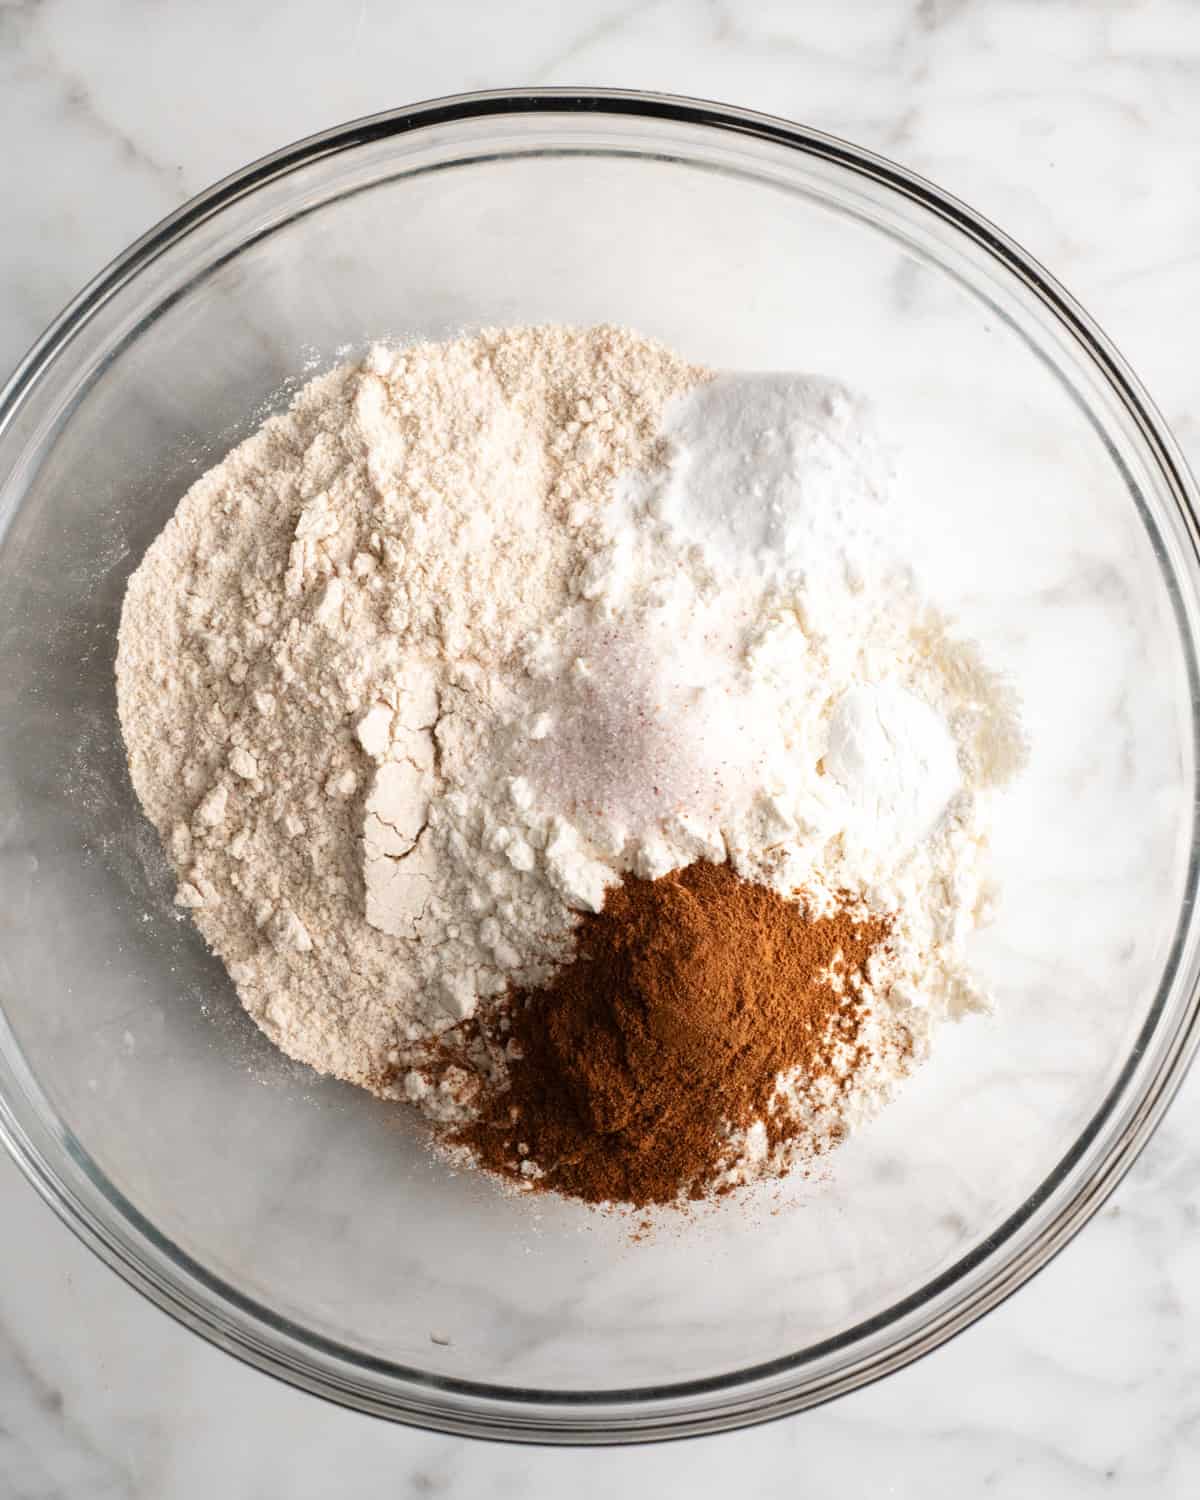 How to Make Gluten-Free Carrot Cake - dry ingredients in a bowl before mixing